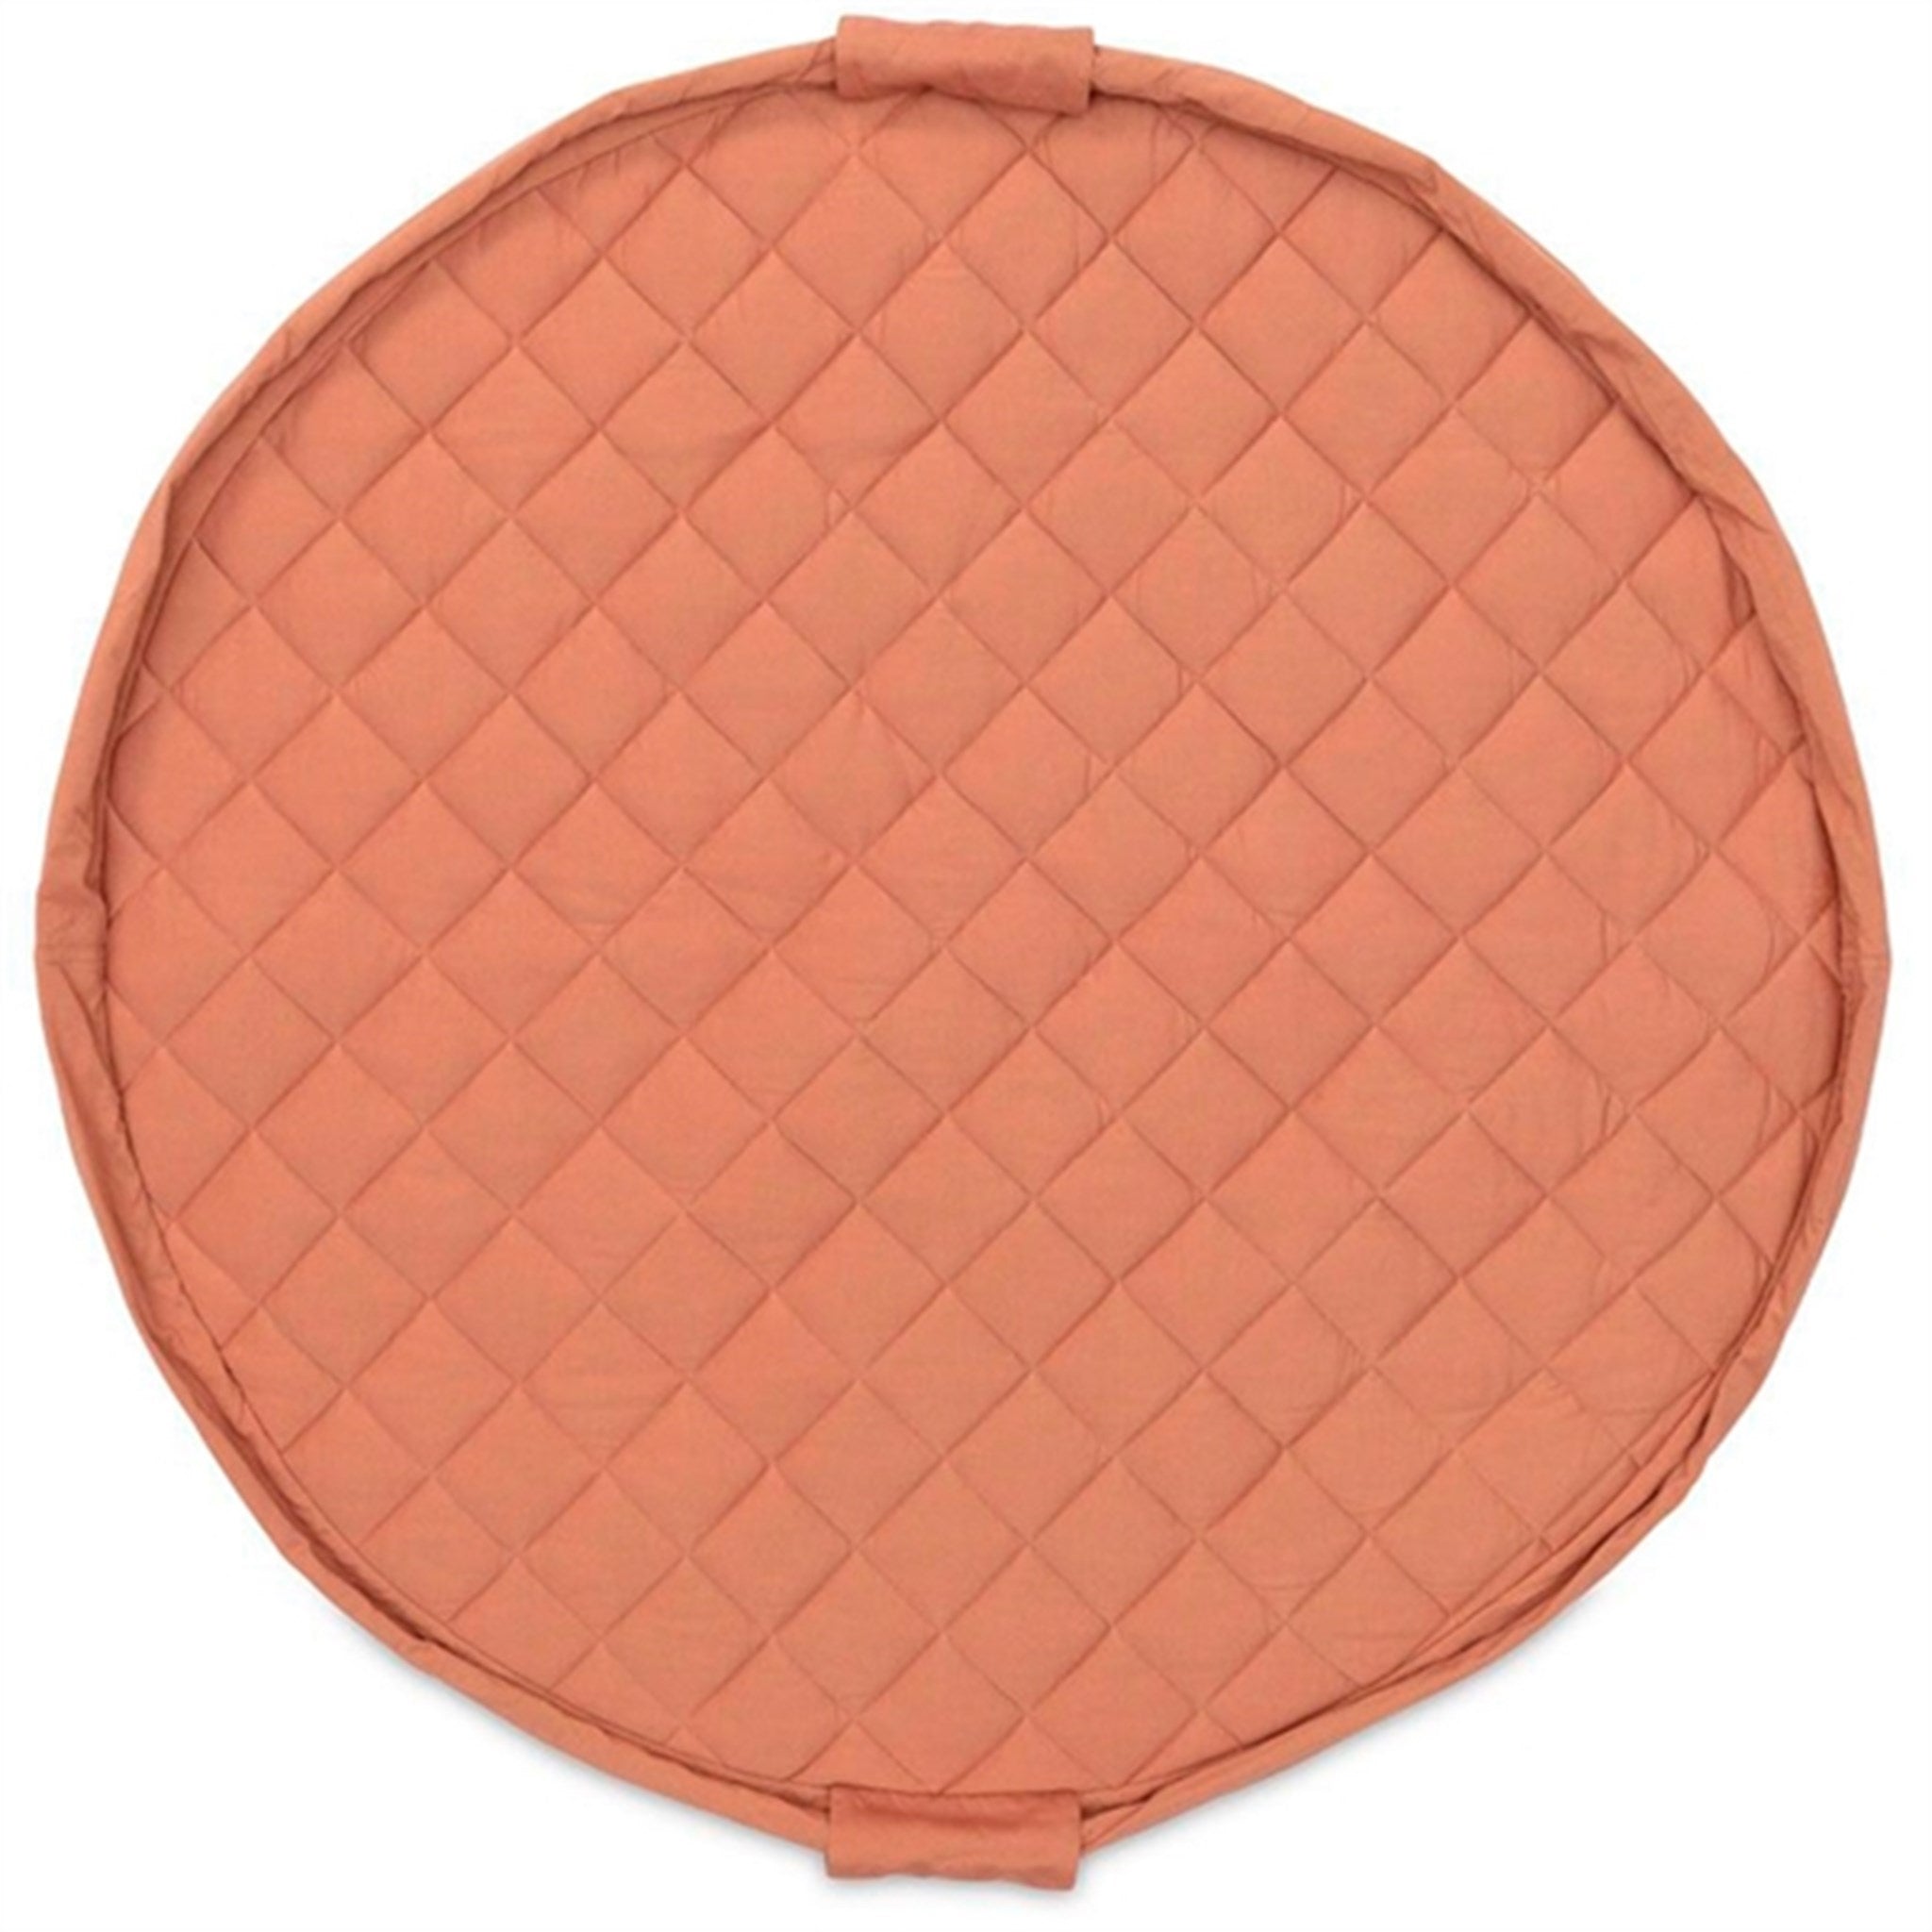 Play&Go 2-in-1 Play Mat Soft Organic Tawny Brown